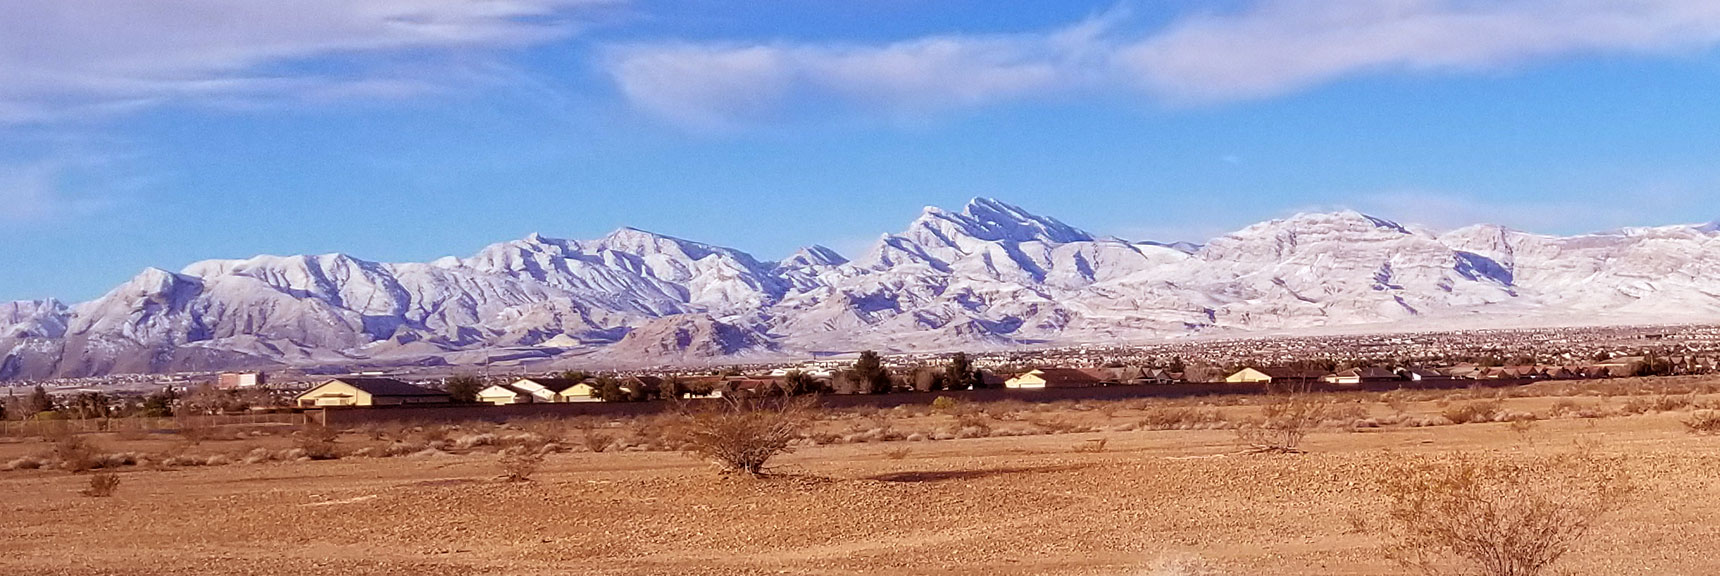 La Madre Mountain Wilderness from South of Gass Peak, Nevada After Snowfall